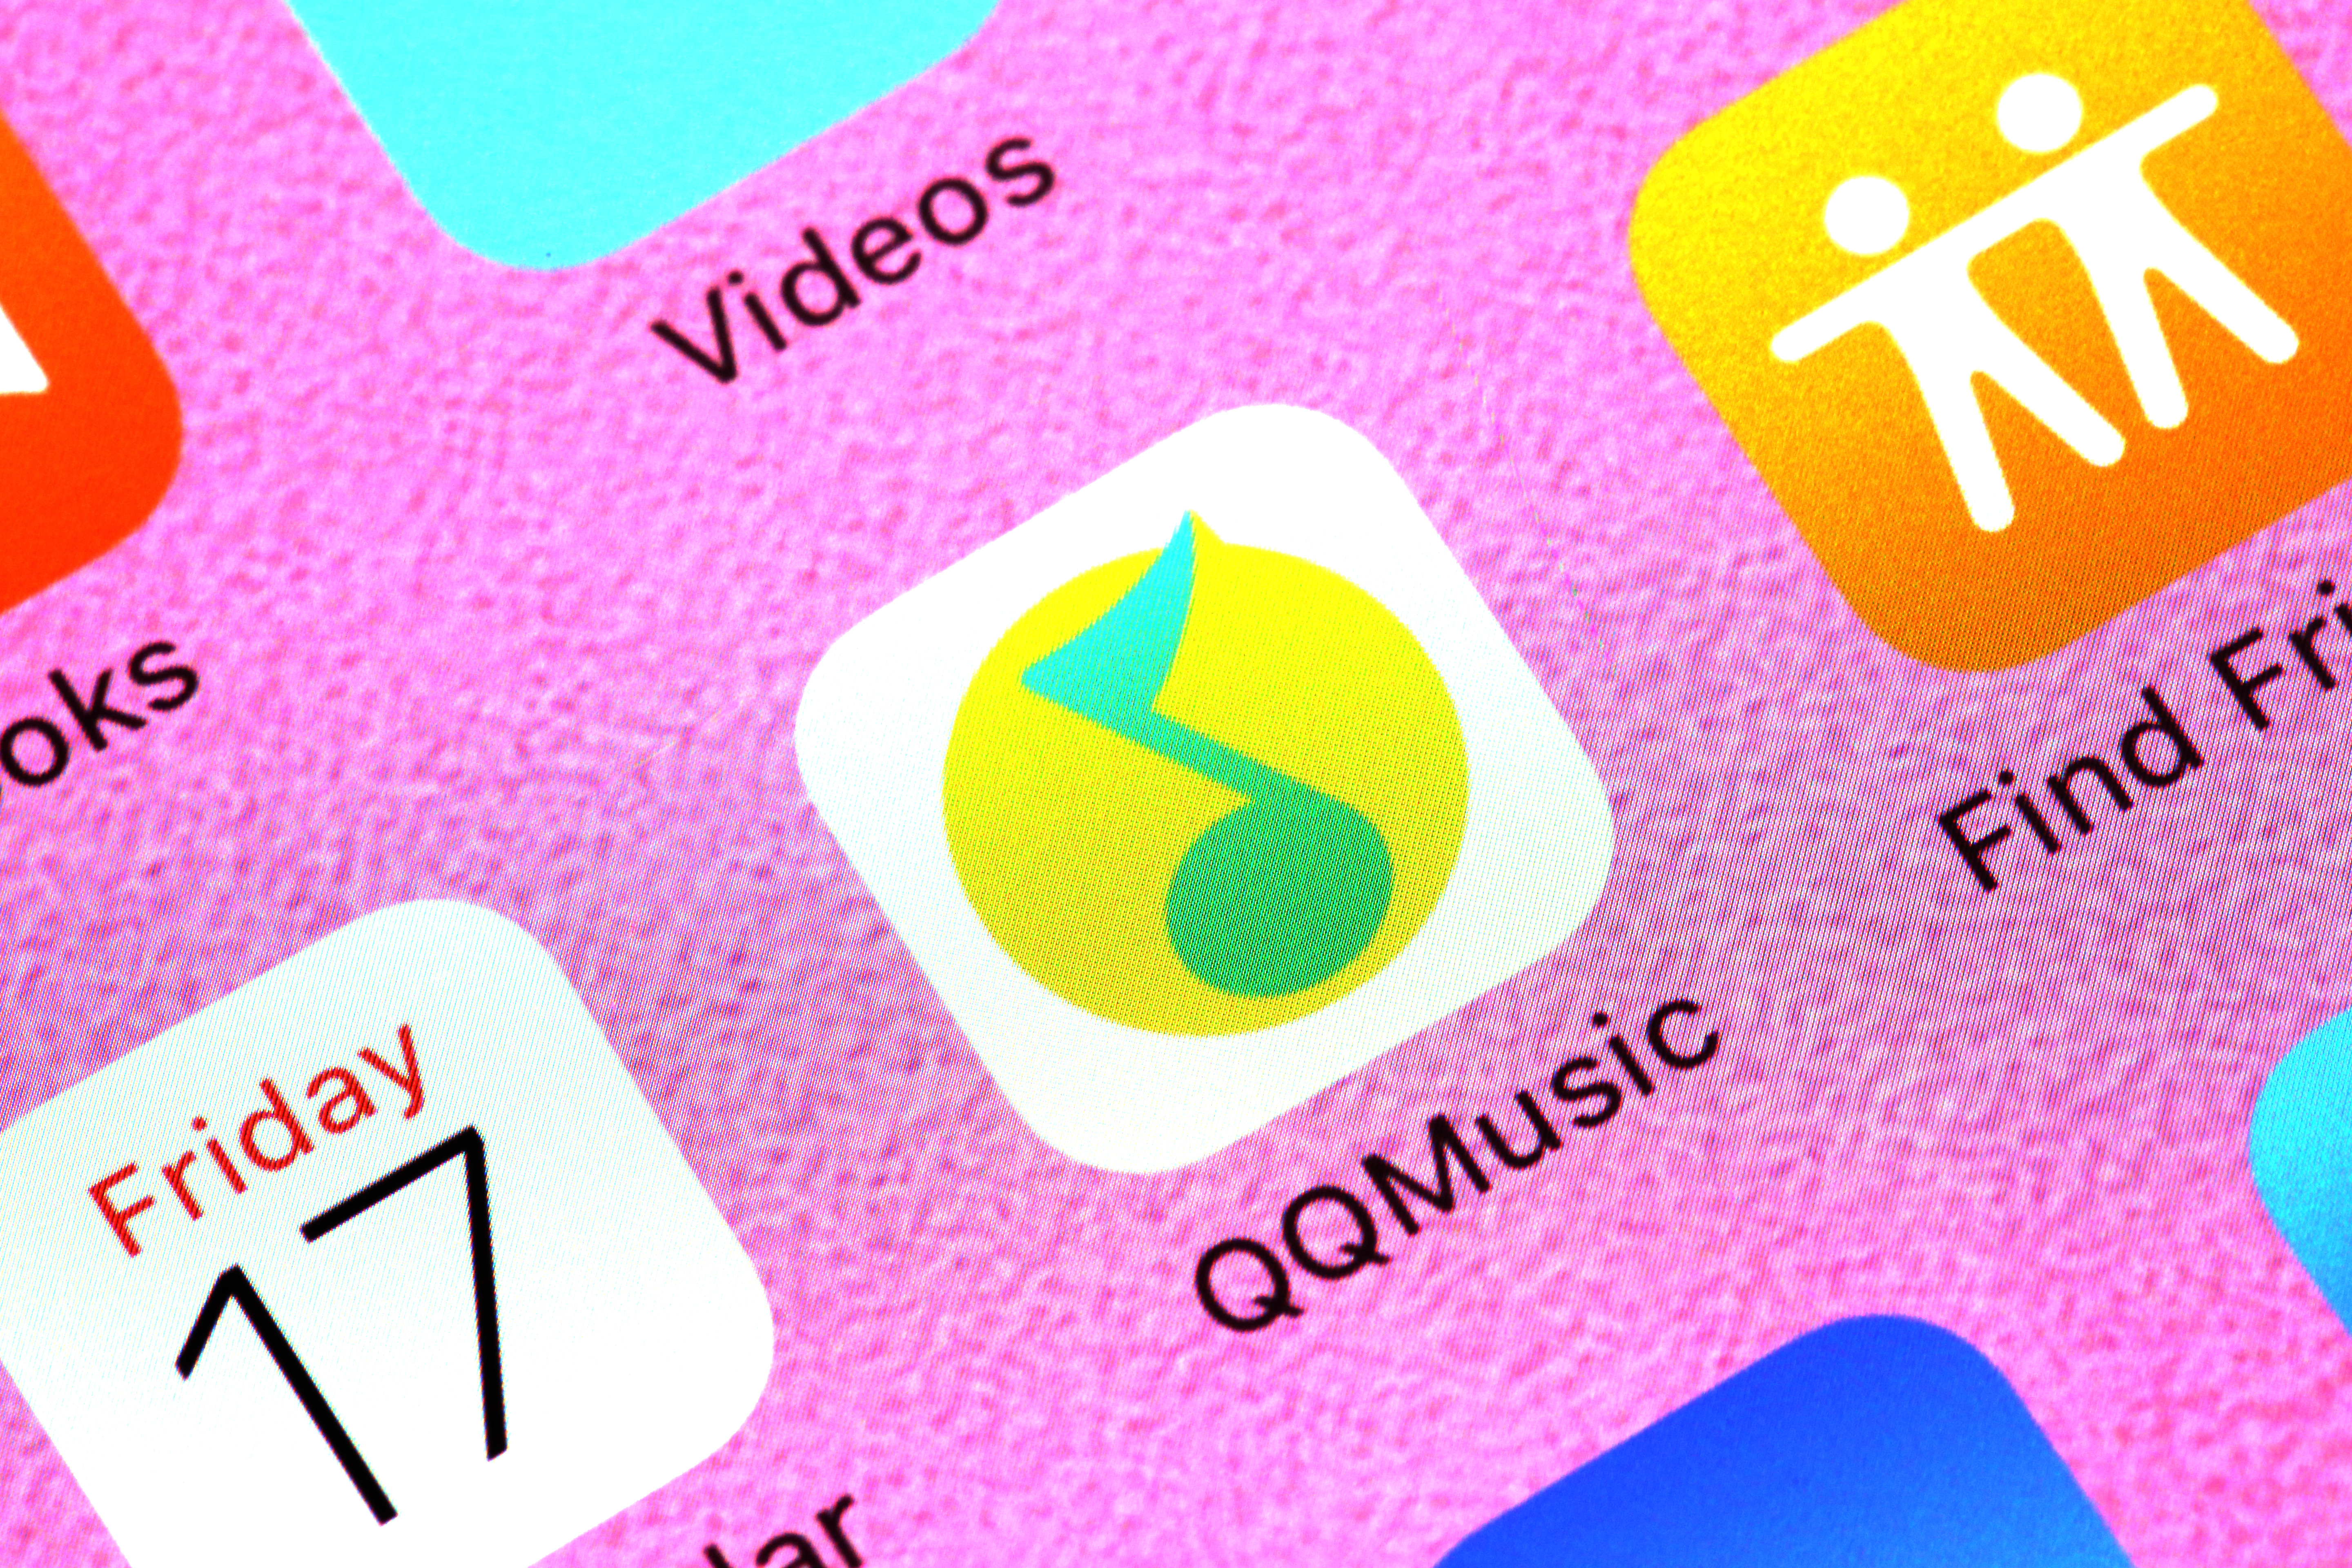 Tencent Music grows its revenues by 31% and beats analysts expectations in Q3 (updated)